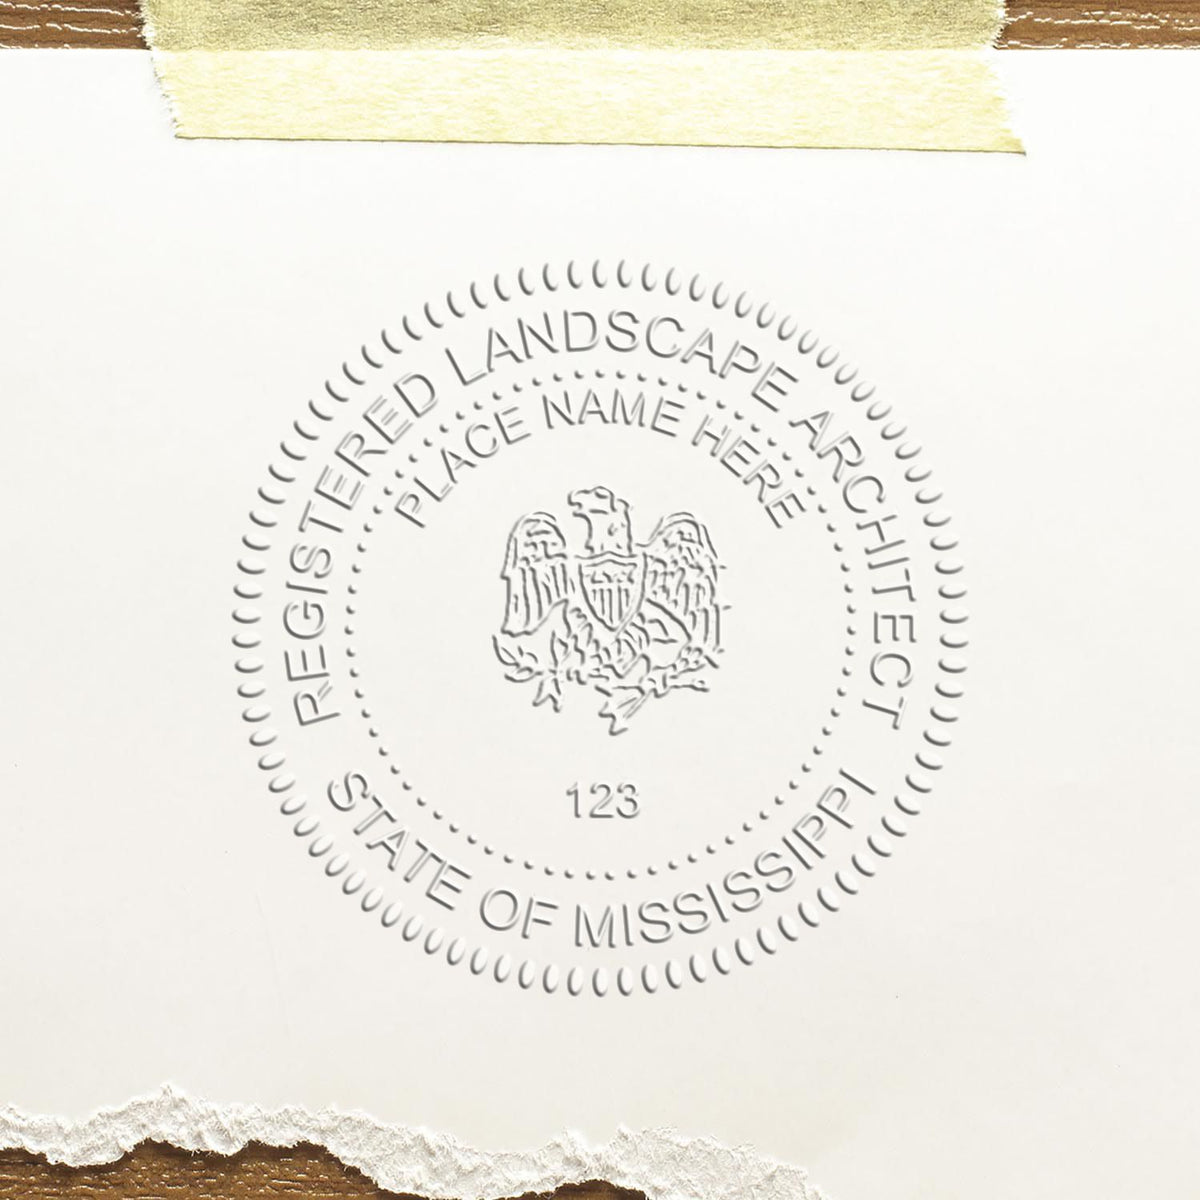 The Soft Pocket Mississippi Landscape Architect Embosser stamp impression comes to life with a crisp, detailed photo on paper - showcasing true professional quality.